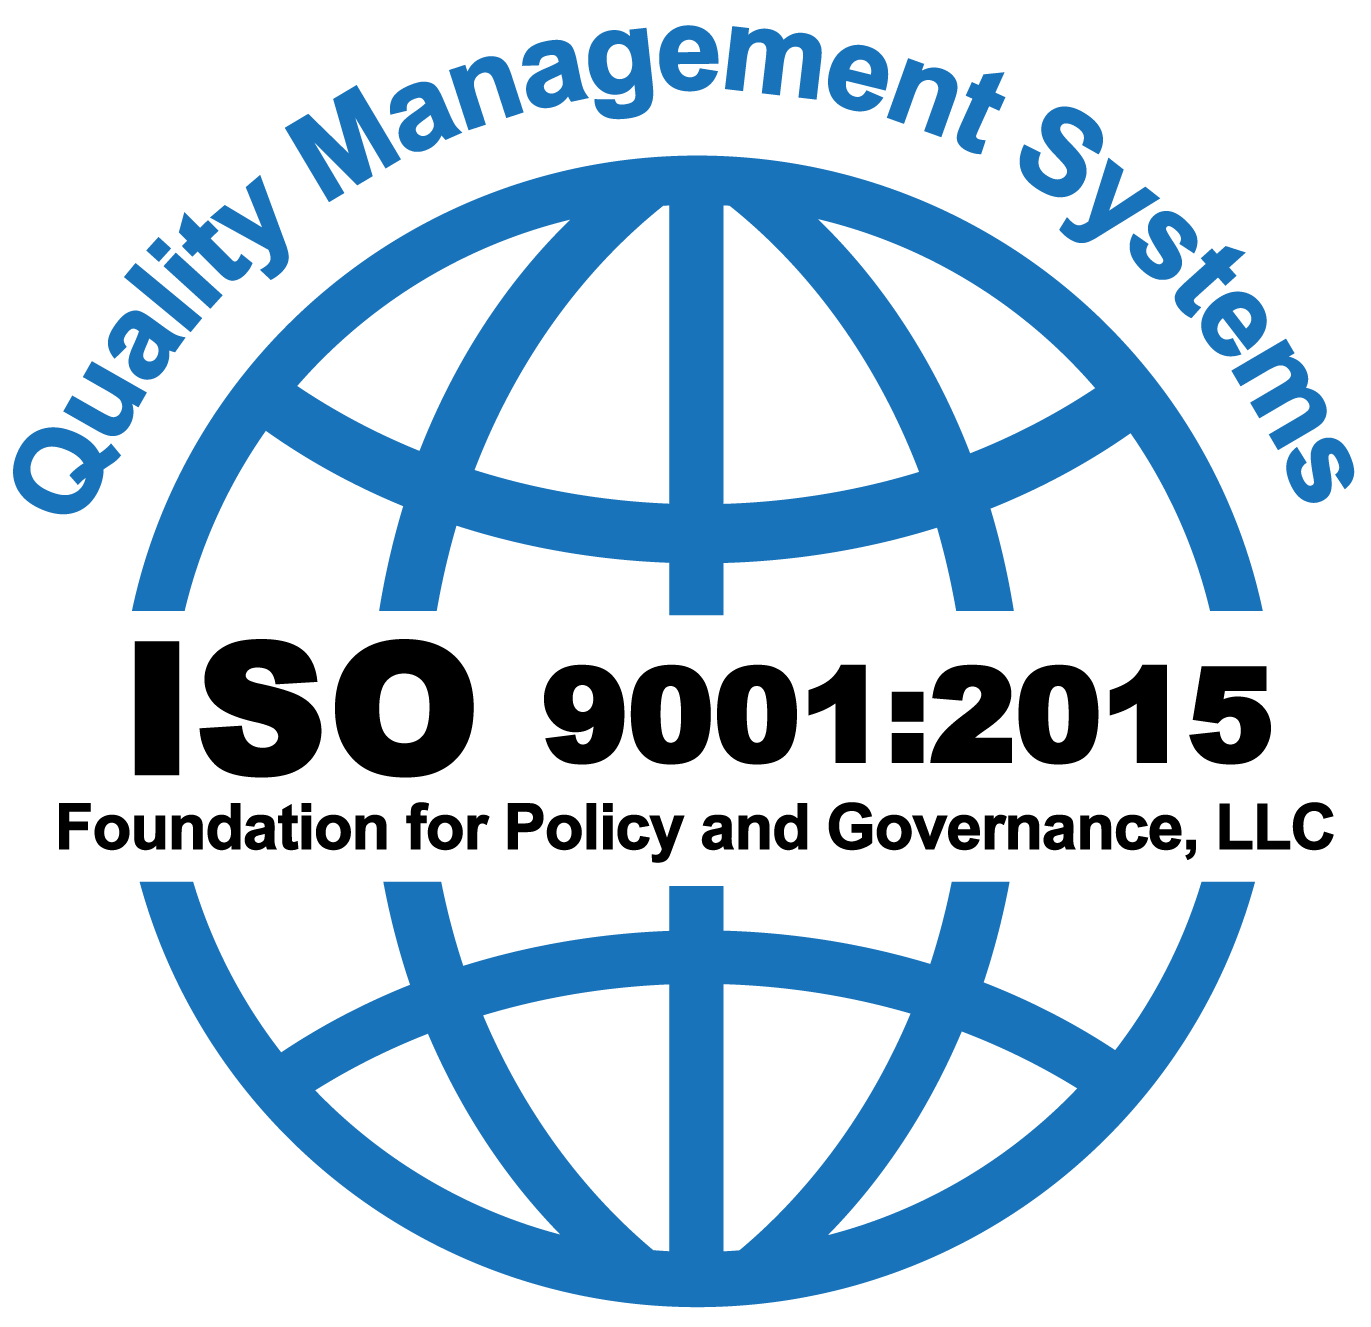 Quality Management Systems ISO 9001:2015 Certified